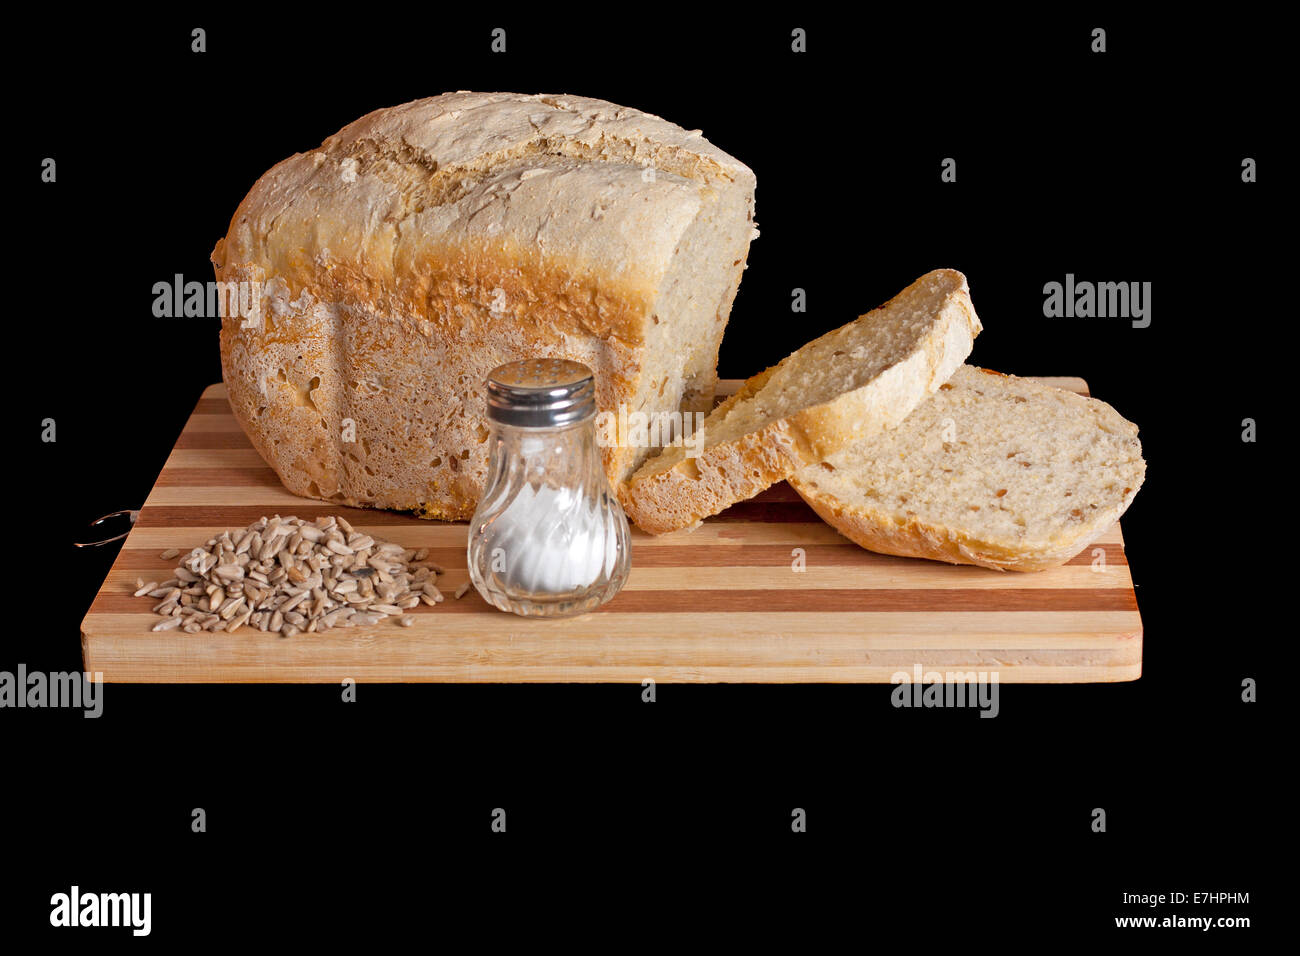 Fresh bred and some seeds on a cutting board isolated over black background Stock Photo